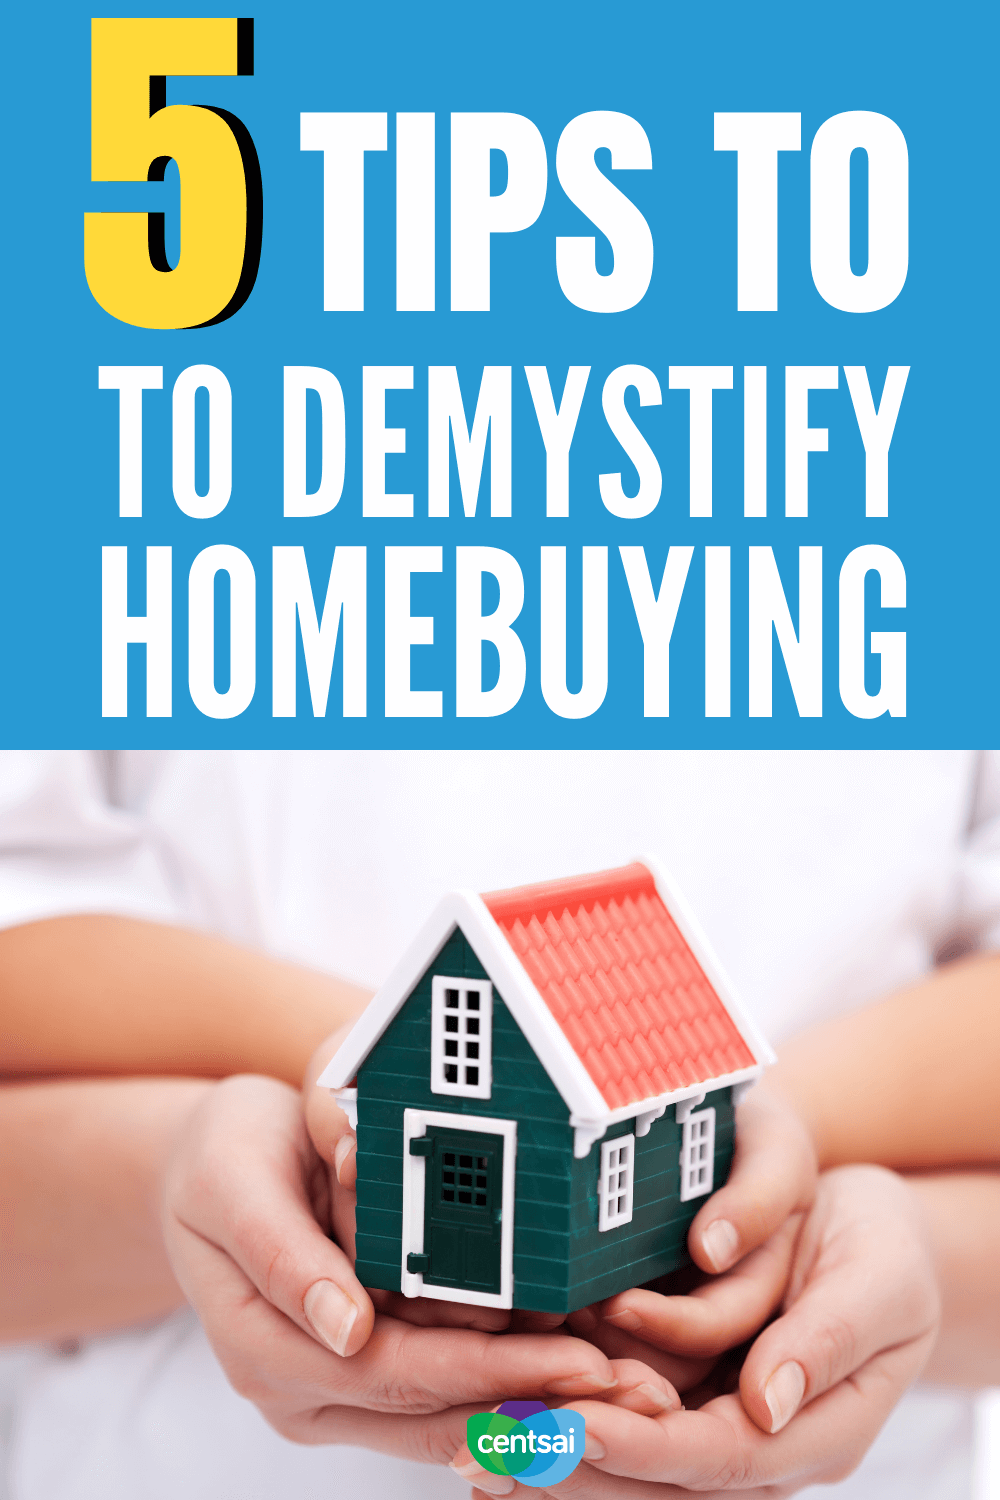 5 Tips to Demystify Homebuying. Too many Americans don't know much about the homebuying process. Learn five real estate tips for buyers that can help you in your search. #CentSai #Investing #investmenttips #investing #investment